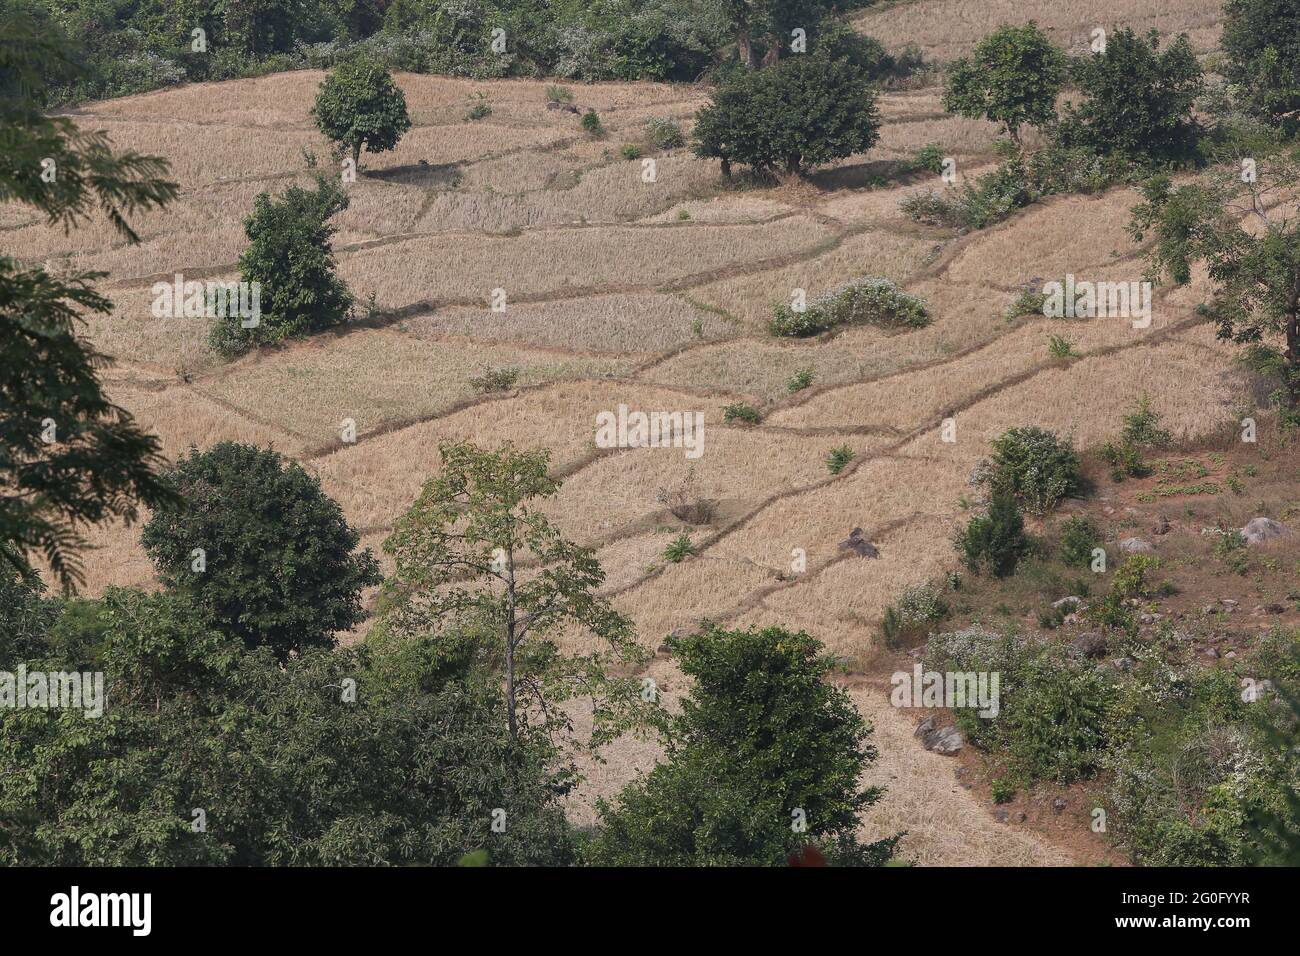 LANJIA SAORA TRIBE. Terraced fields used for cultivation of paddy. Terrace farming is known as Sarabs. Near Puttasingh village of Odisha, India Stock Photo